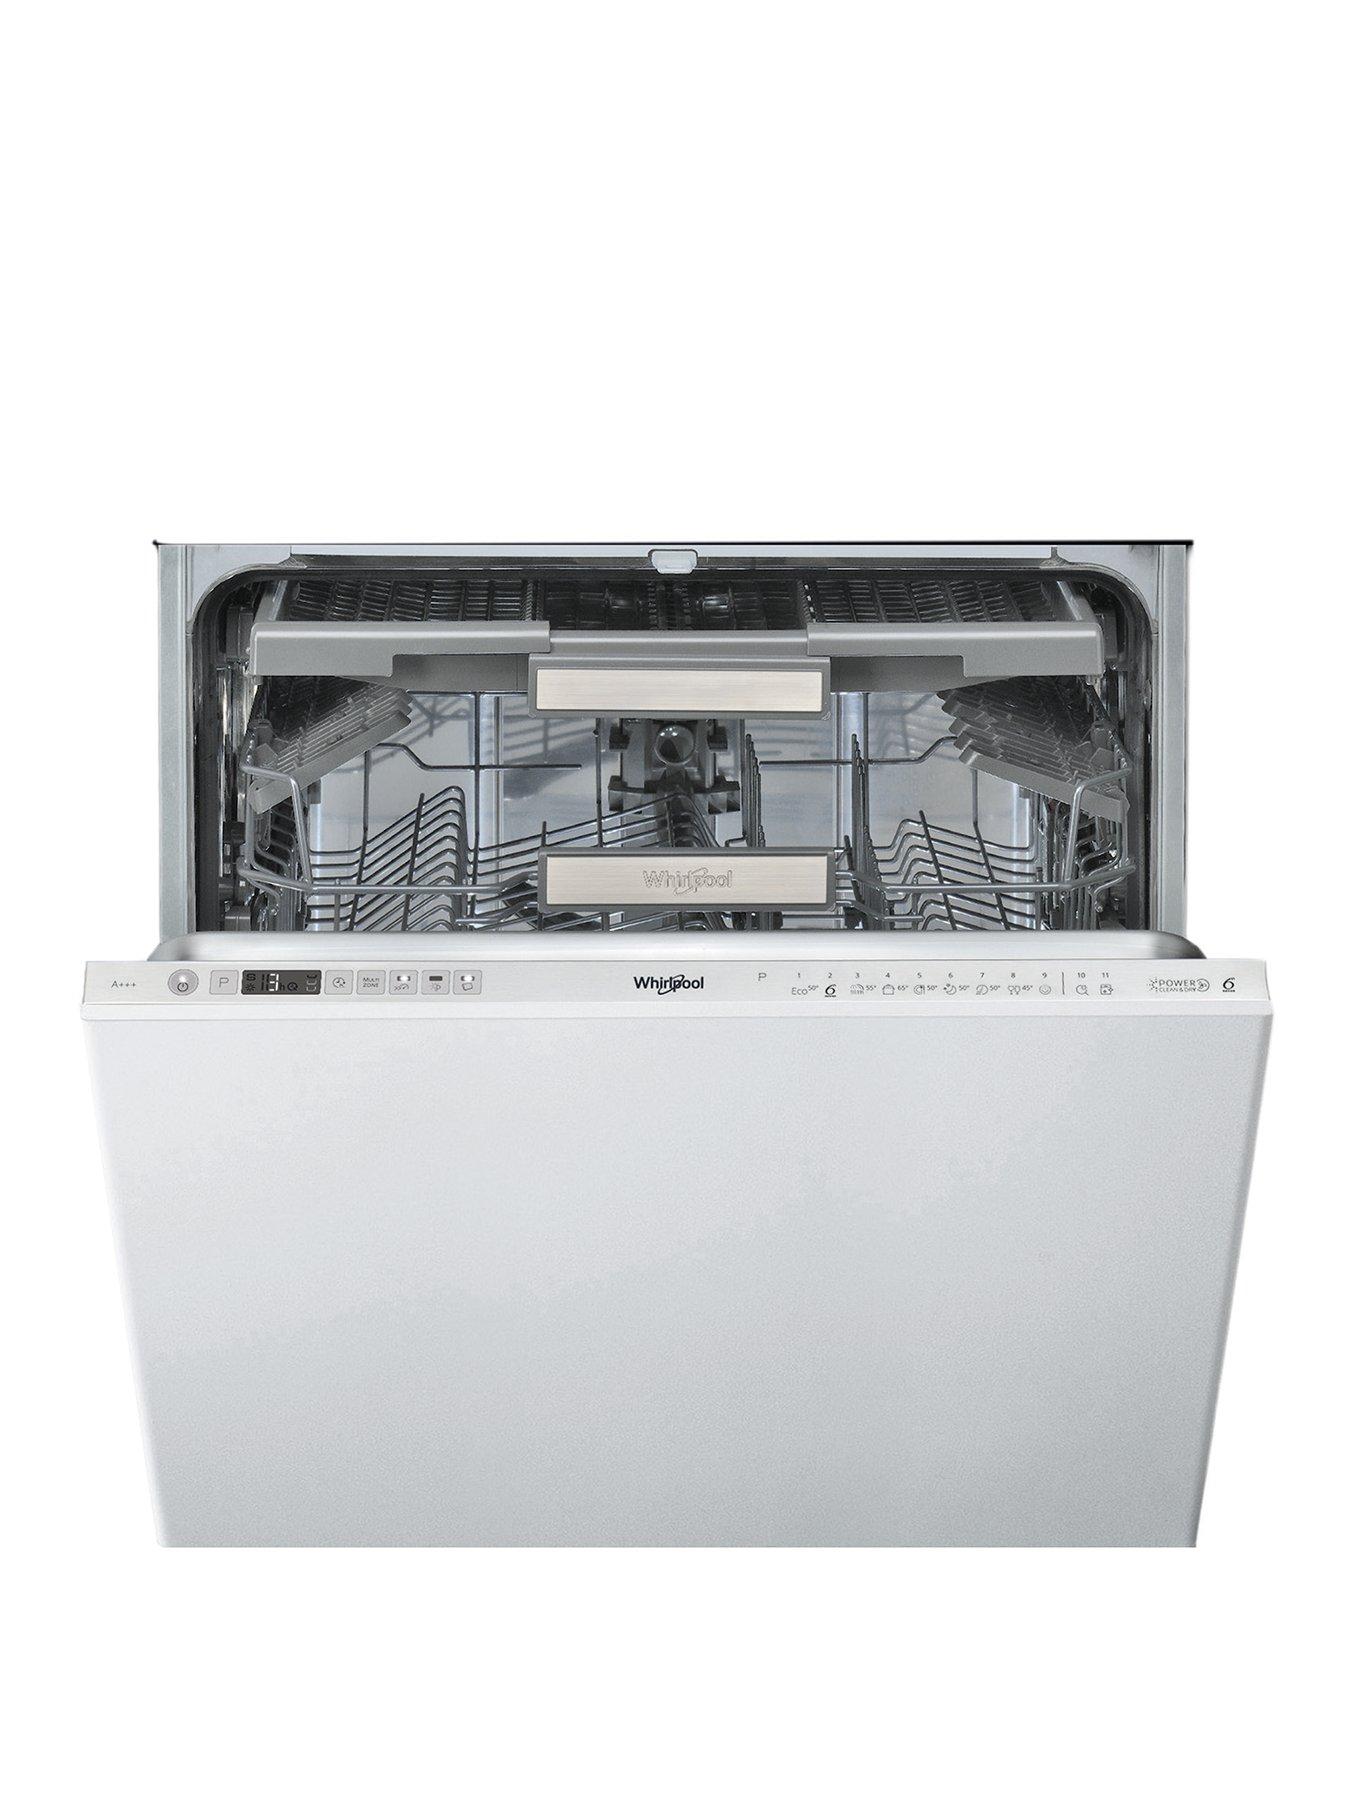 Details about   Whirlpool Dishwasher 